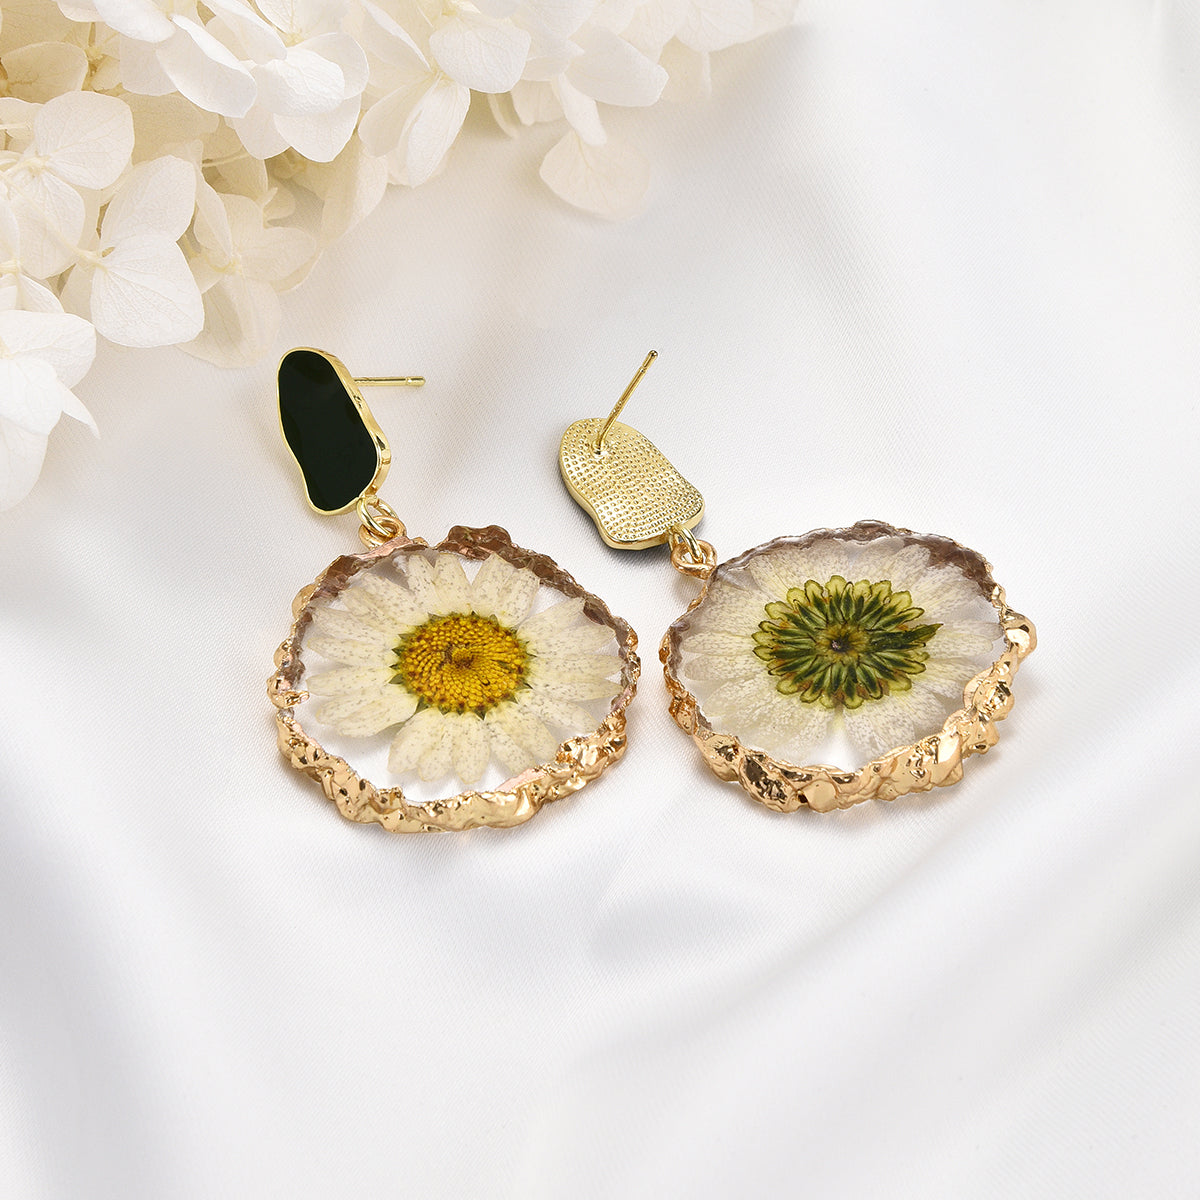 Daisy's summer earrings with golden tips and royal green holders